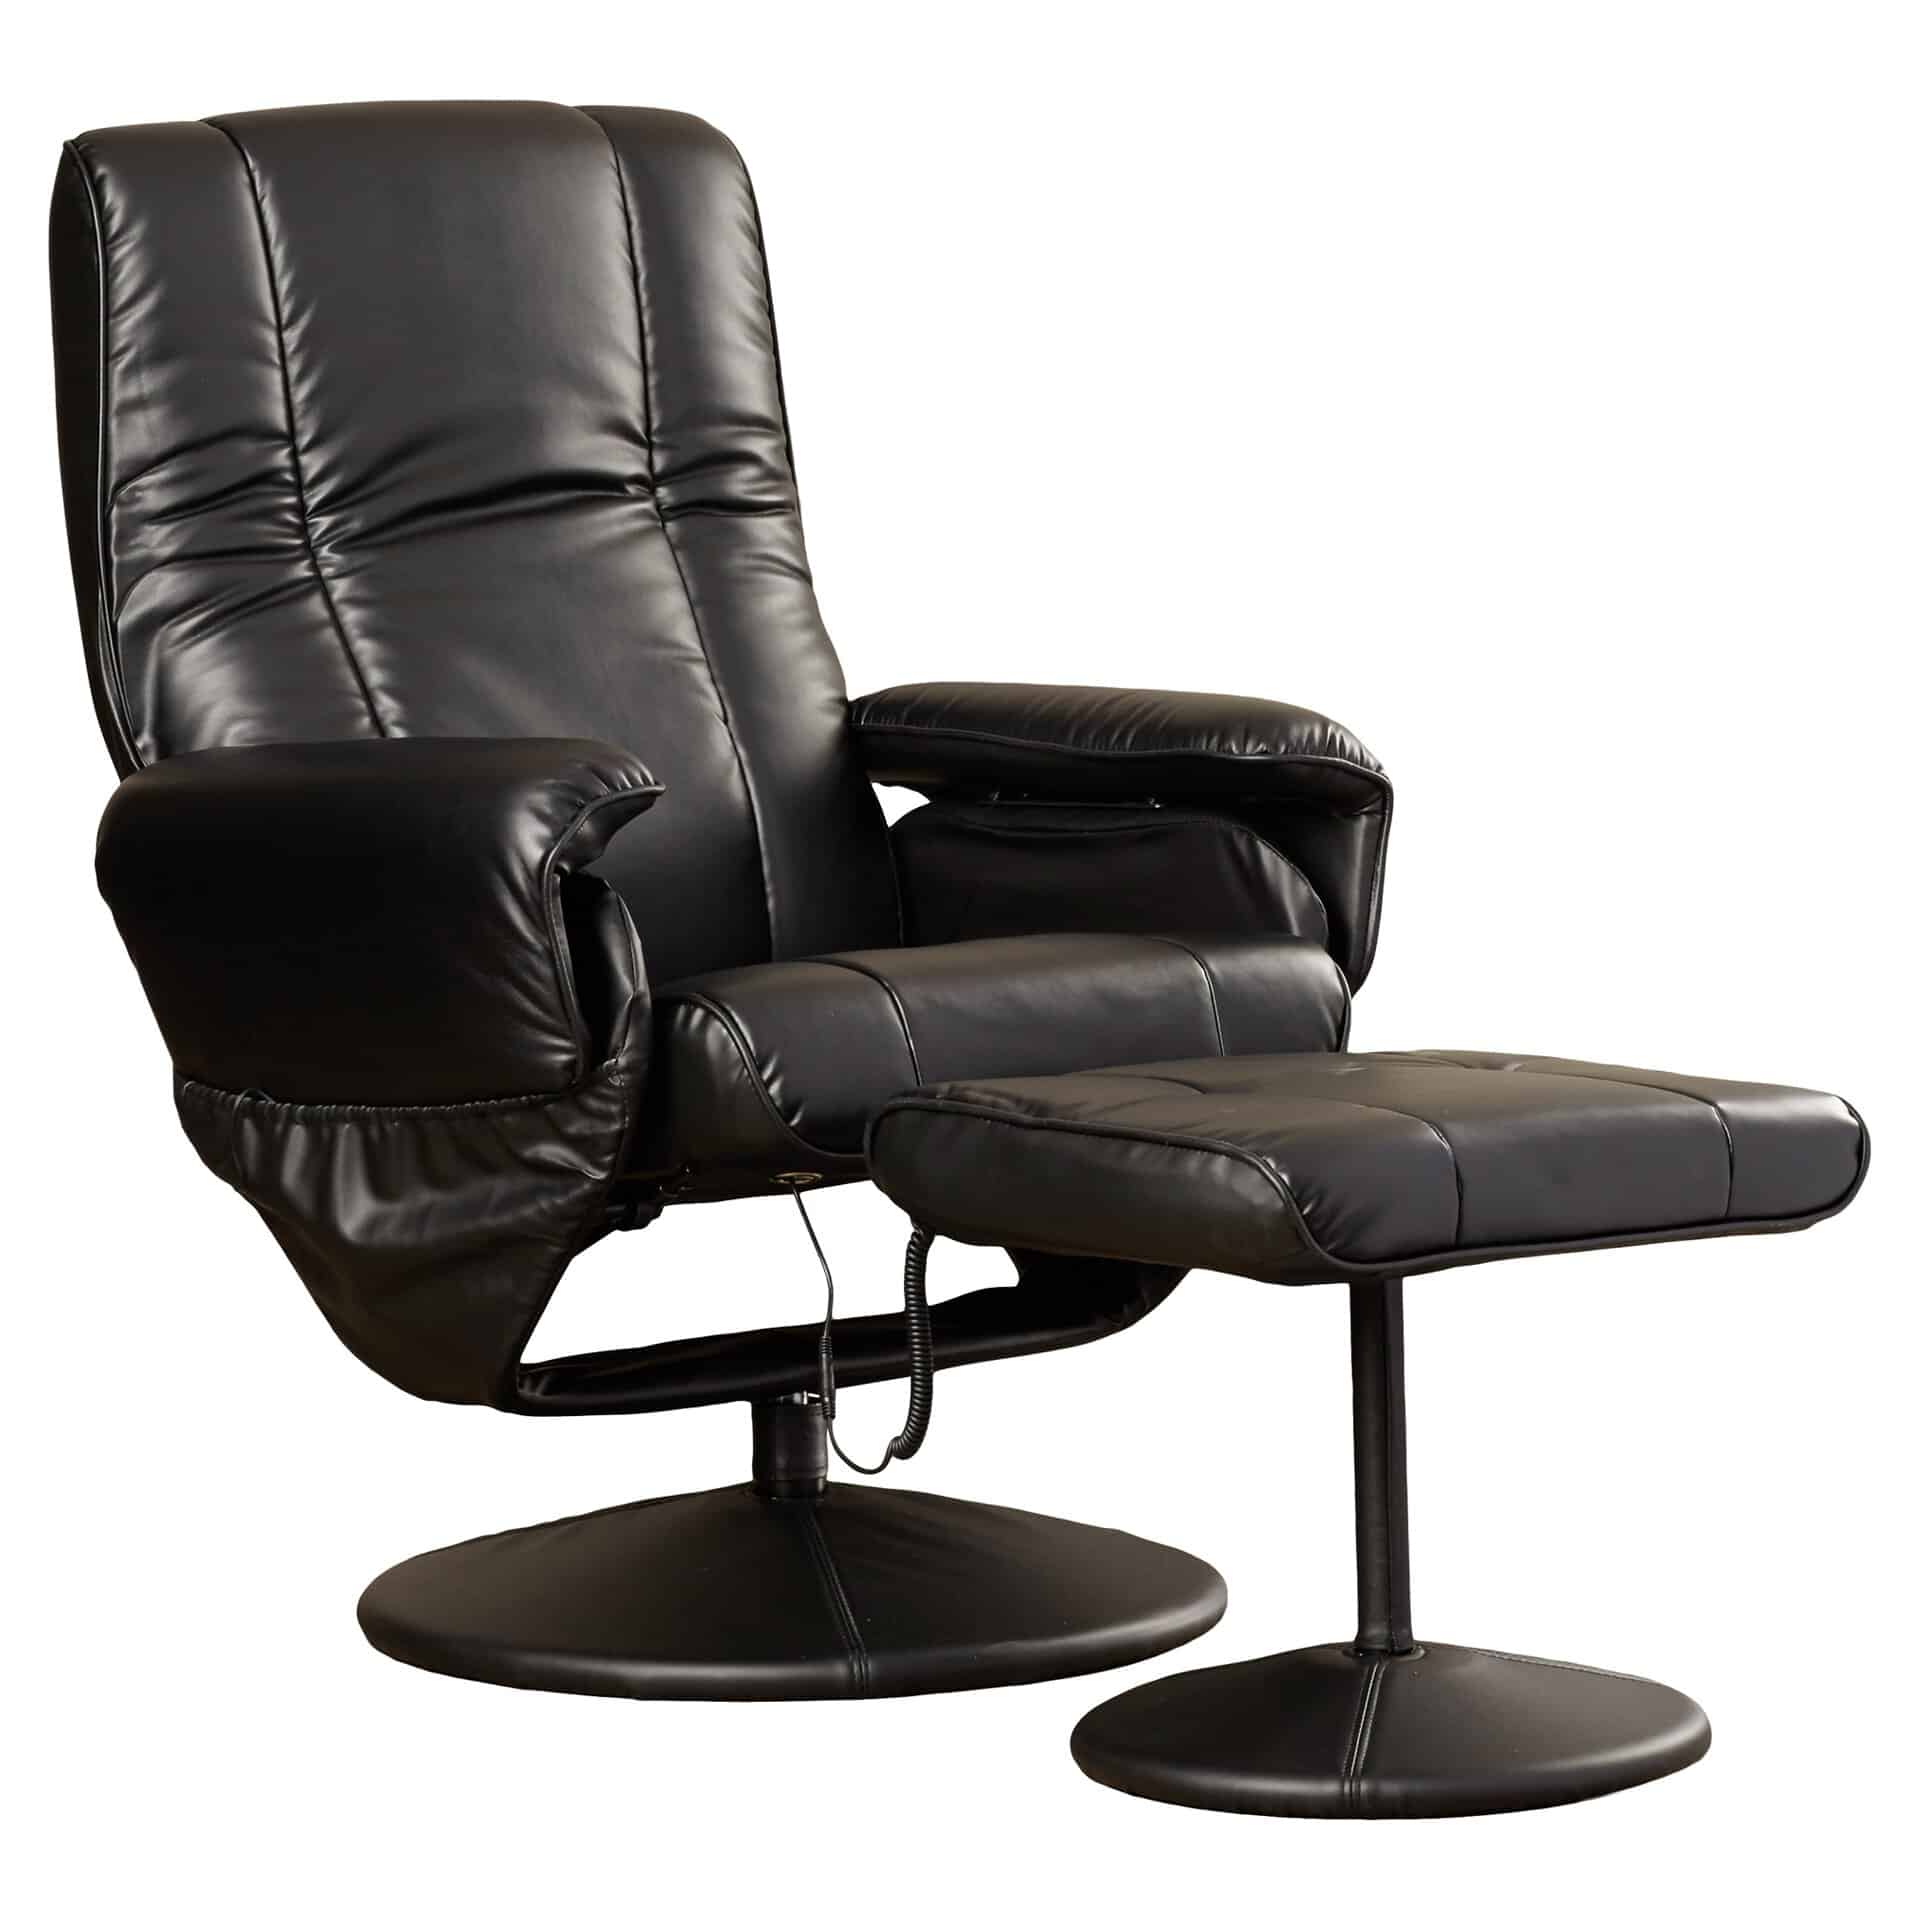 Symple Stuff Leather Heated Reclining Massage Chair with Ottoman ...